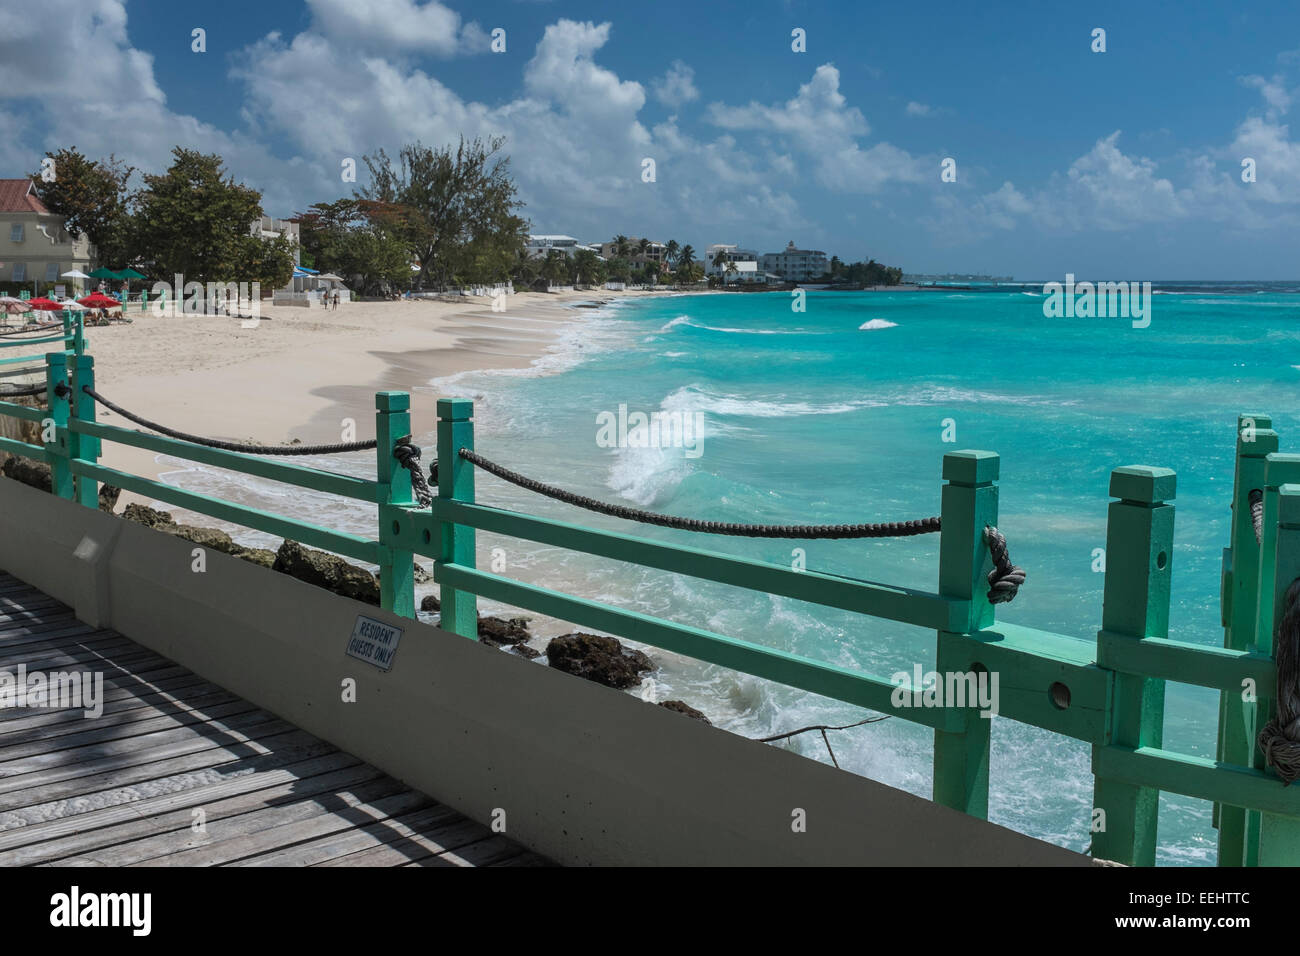 Wooden boardwalk at Worthing Beach on the south coast of the Caribbean island of Barbados, West Indies - EDITORIAL USE ONLY Stock Photo